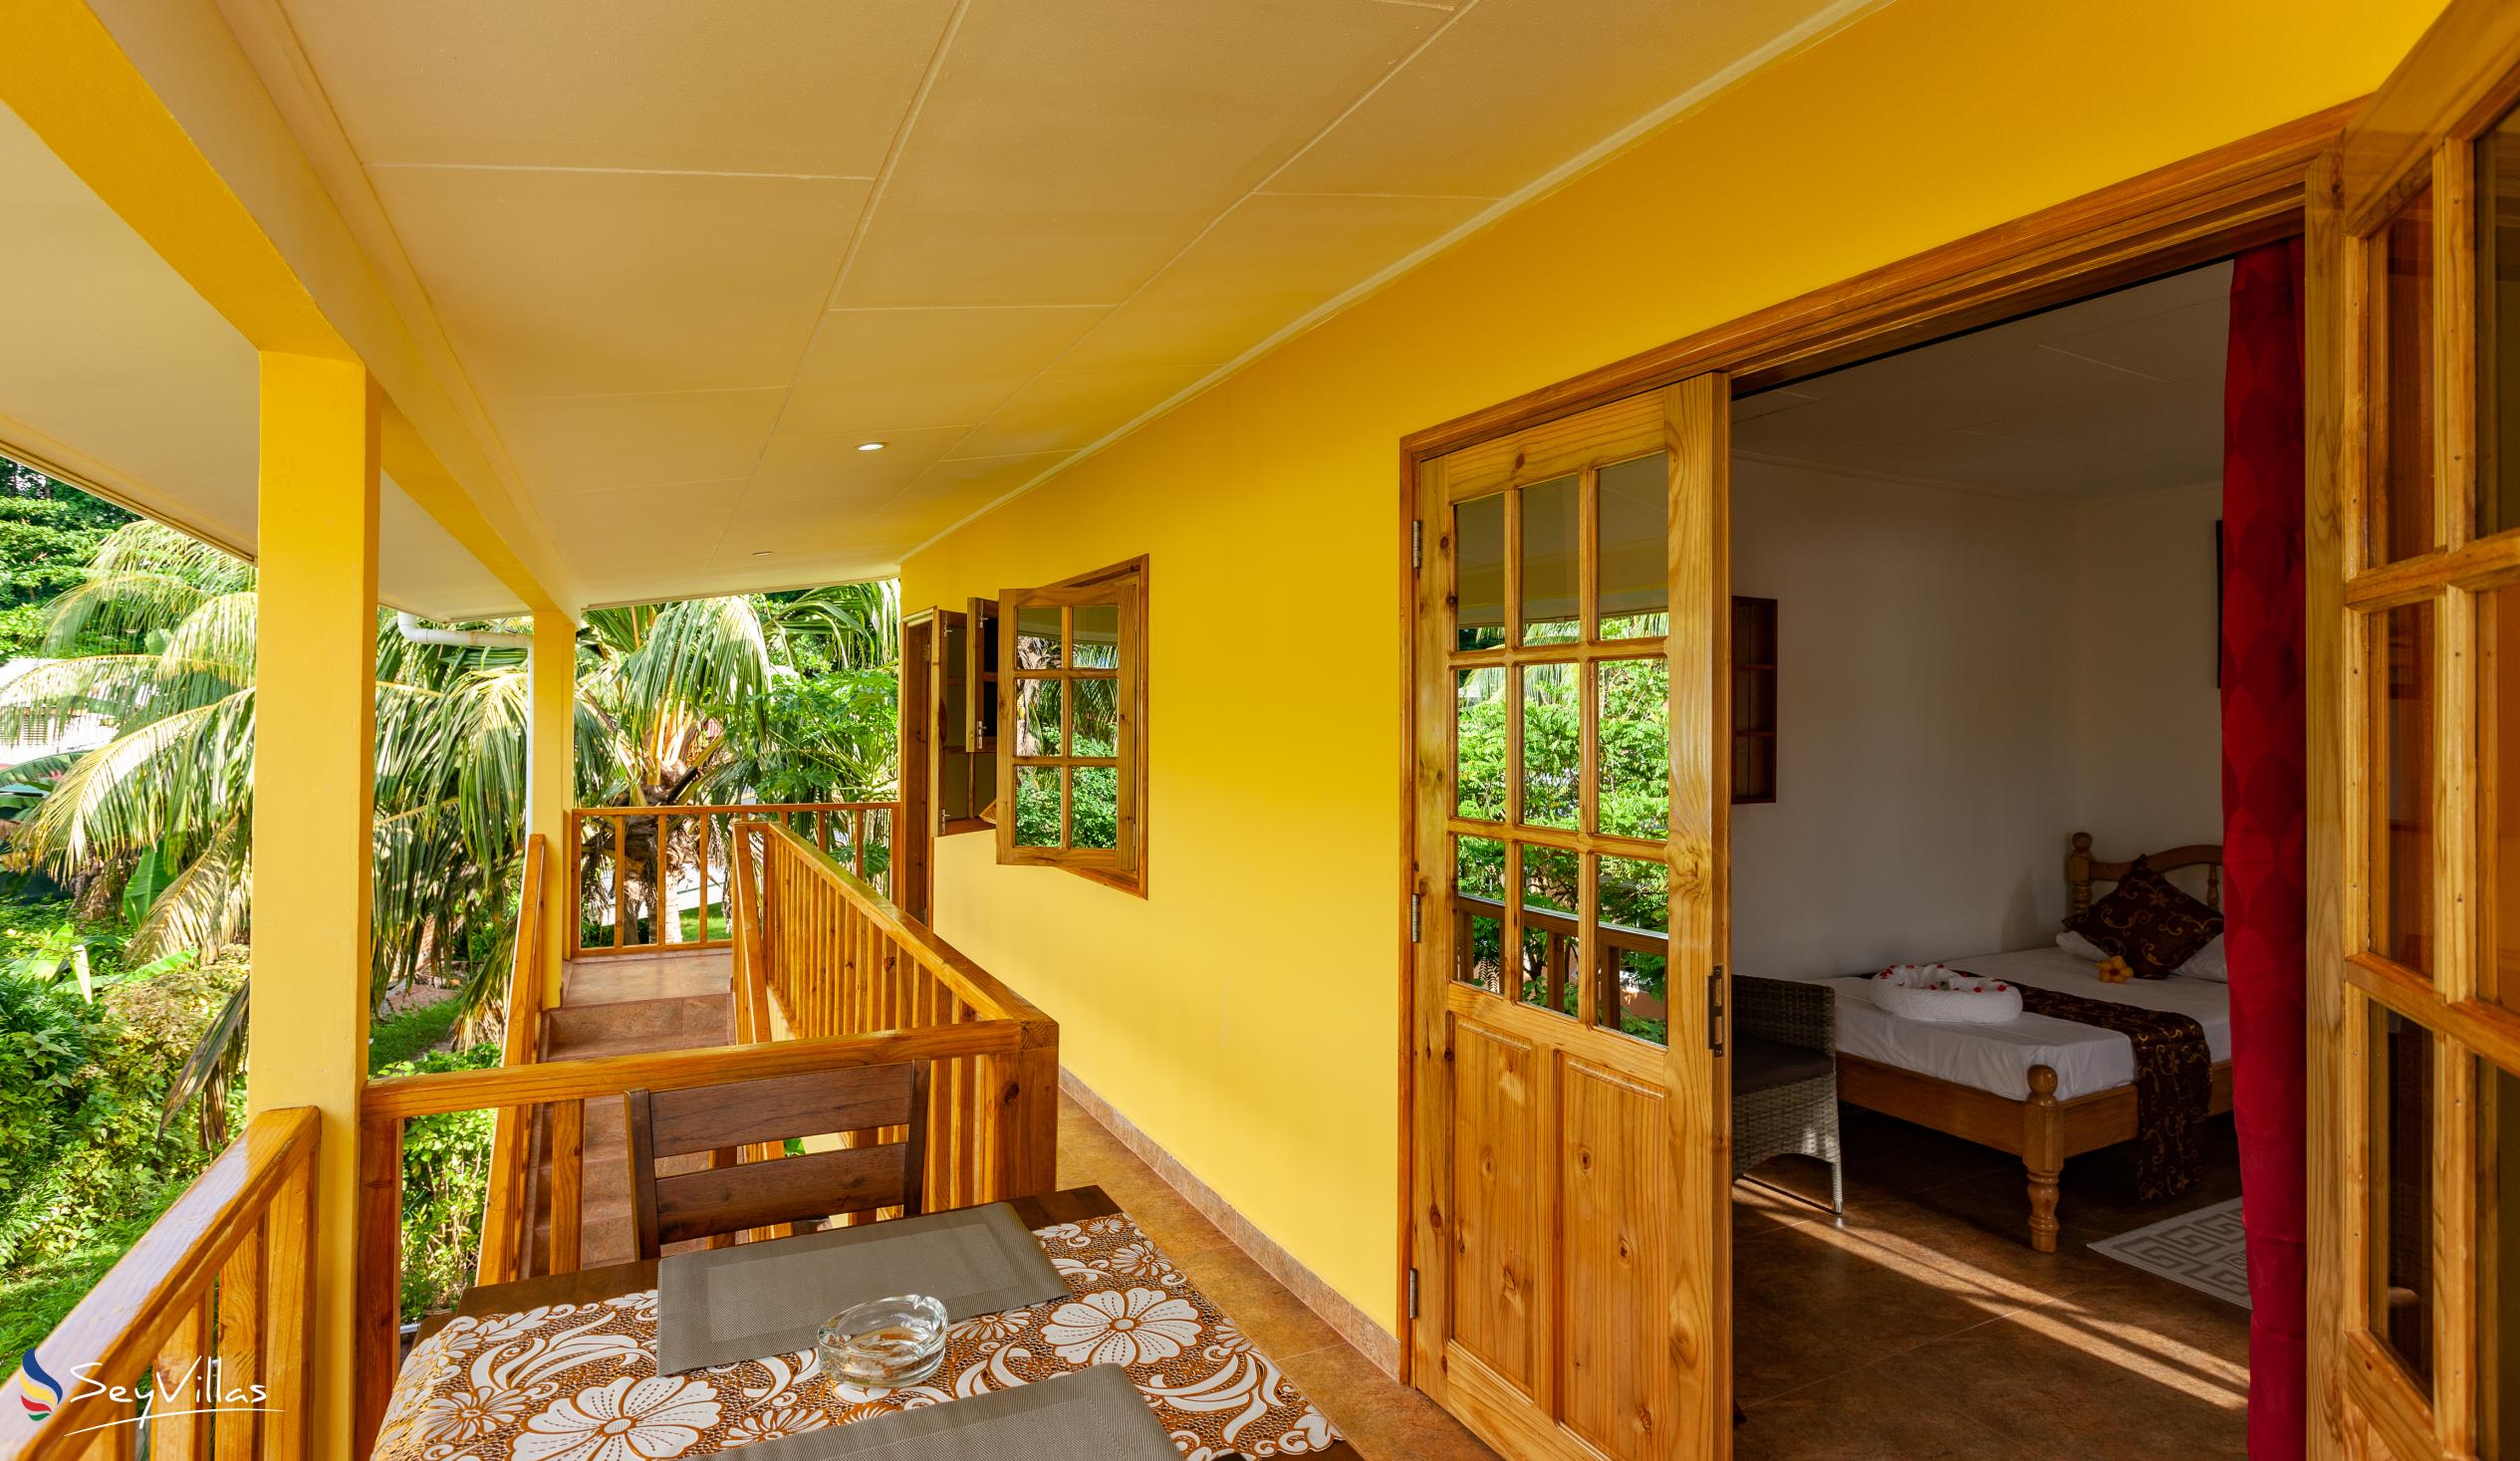 Foto 23: Dream Holiday Self Catering - Appartement Familial - La Digue (Seychelles)